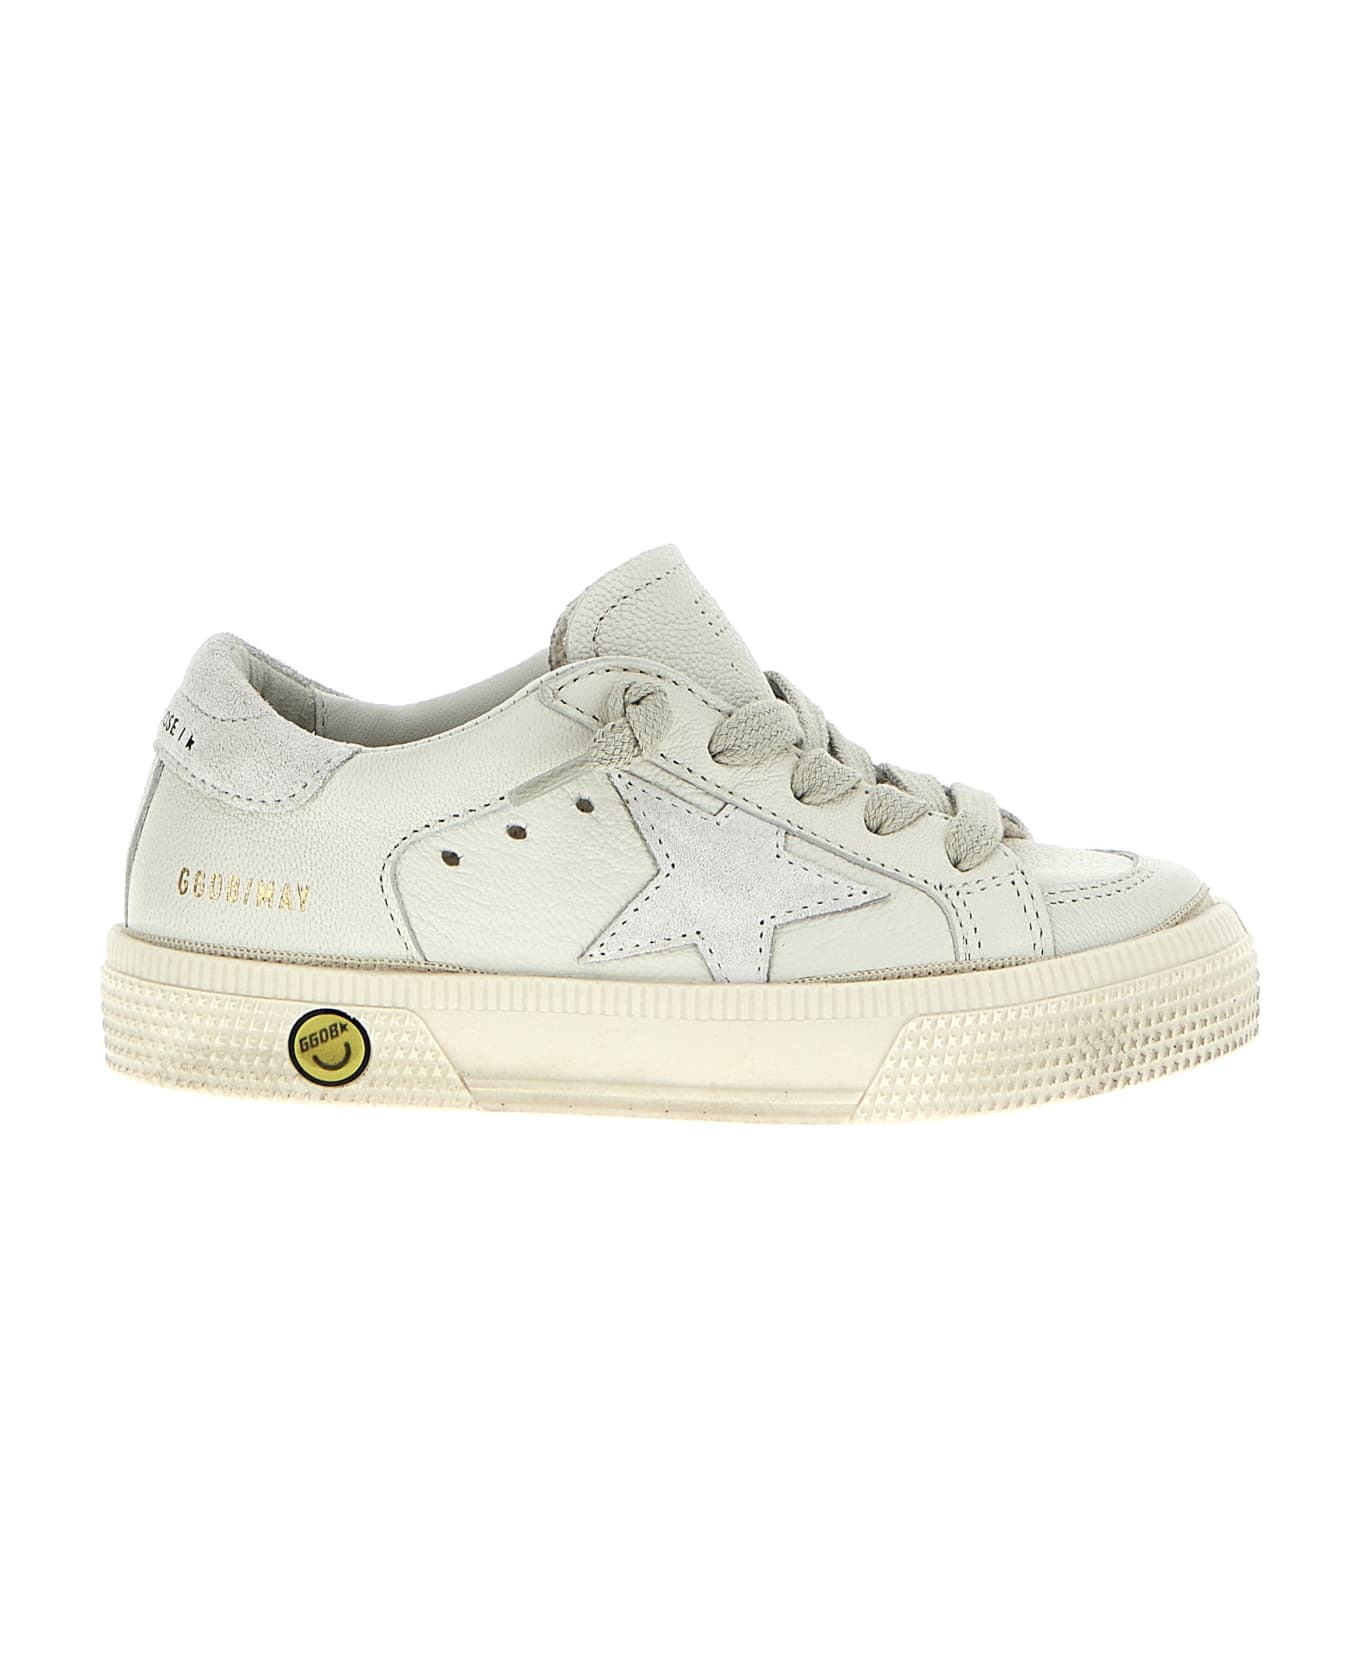 Golden Goose 'may' Sneakers - White